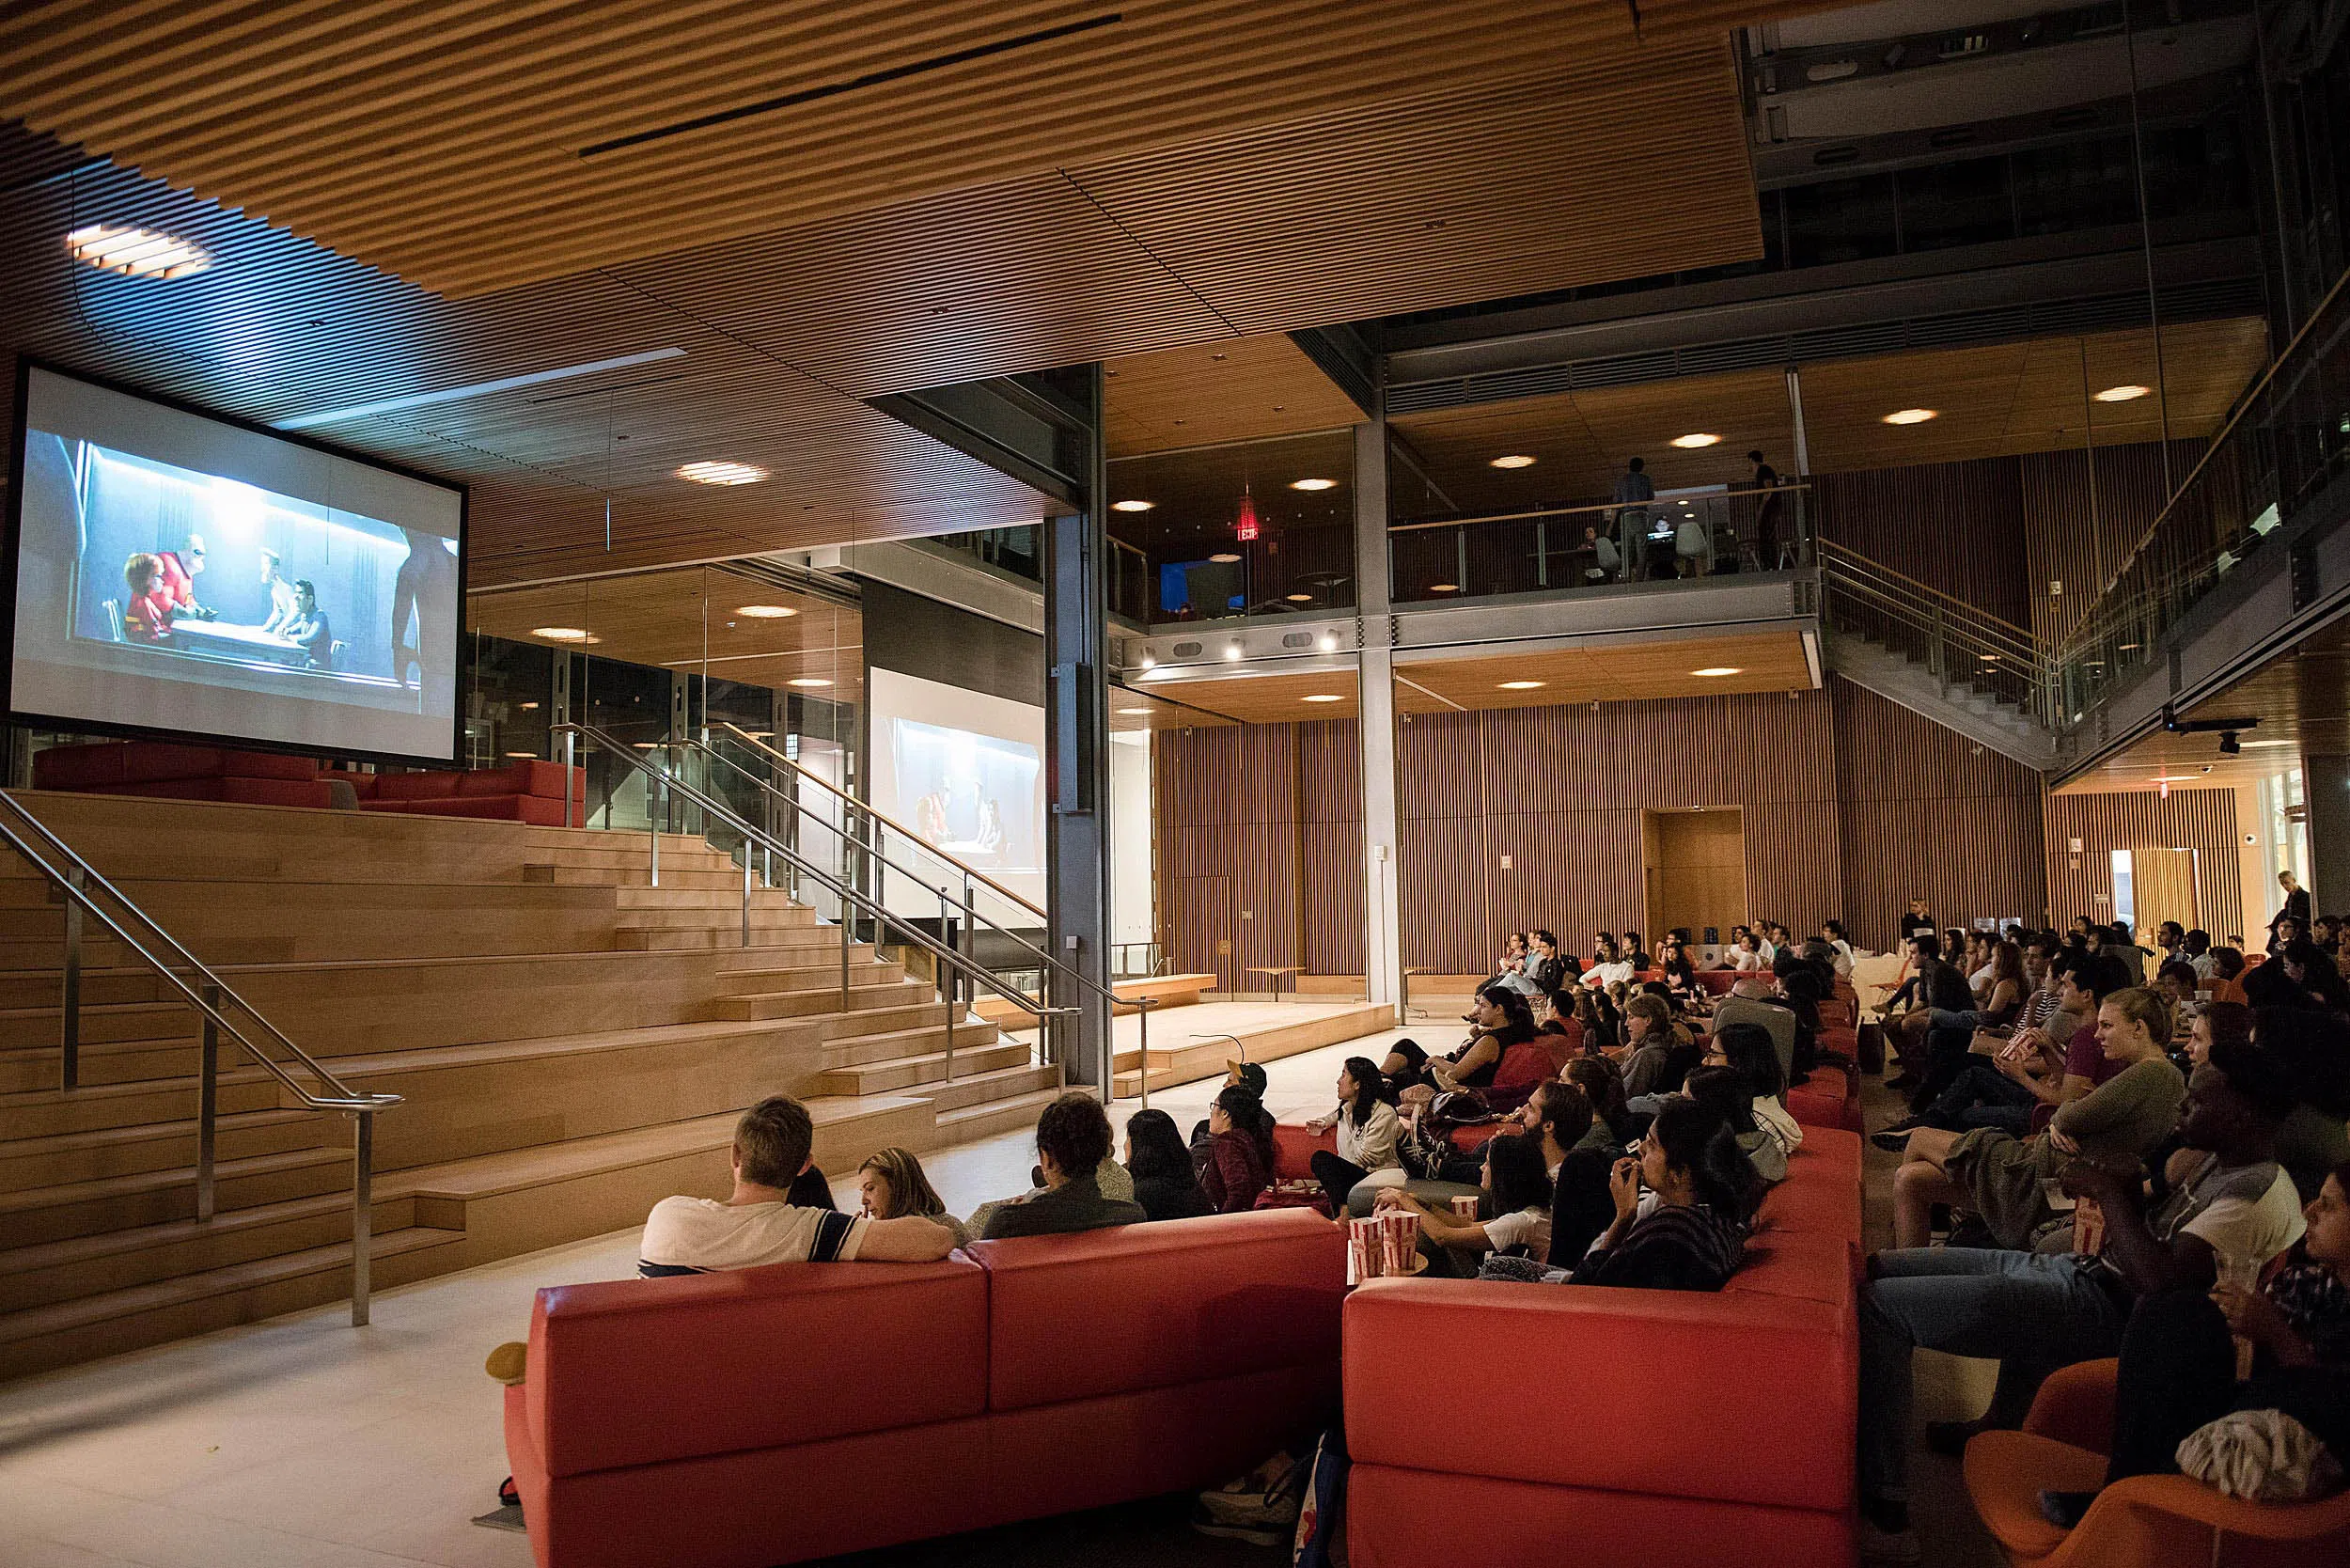 Students gather on couches, watching a projected movie in a large expansive room